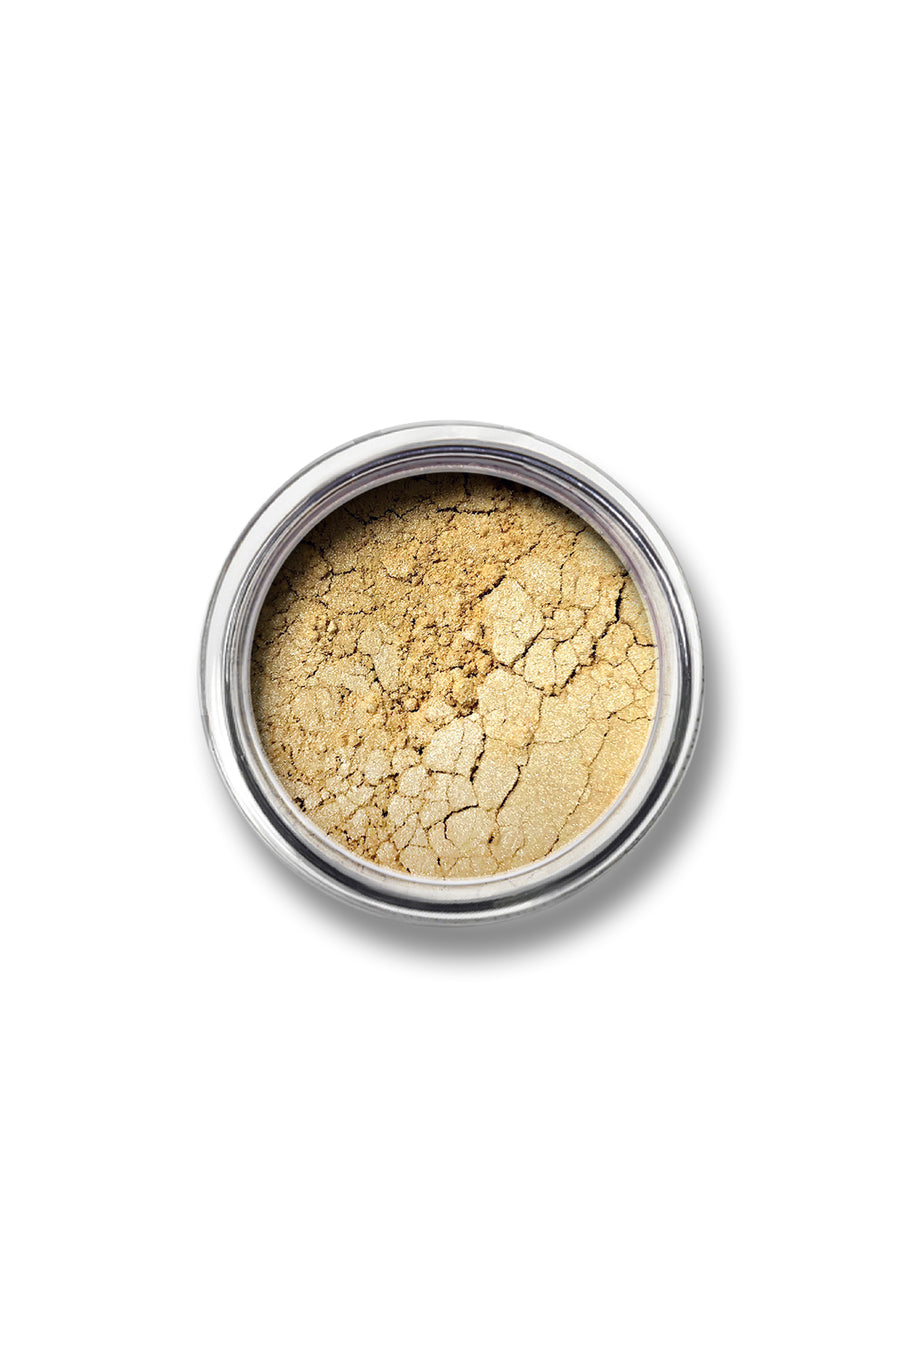 Shimmer Eyeshadow #7 - Soft Yellow - Blend Mineral Cosmetics